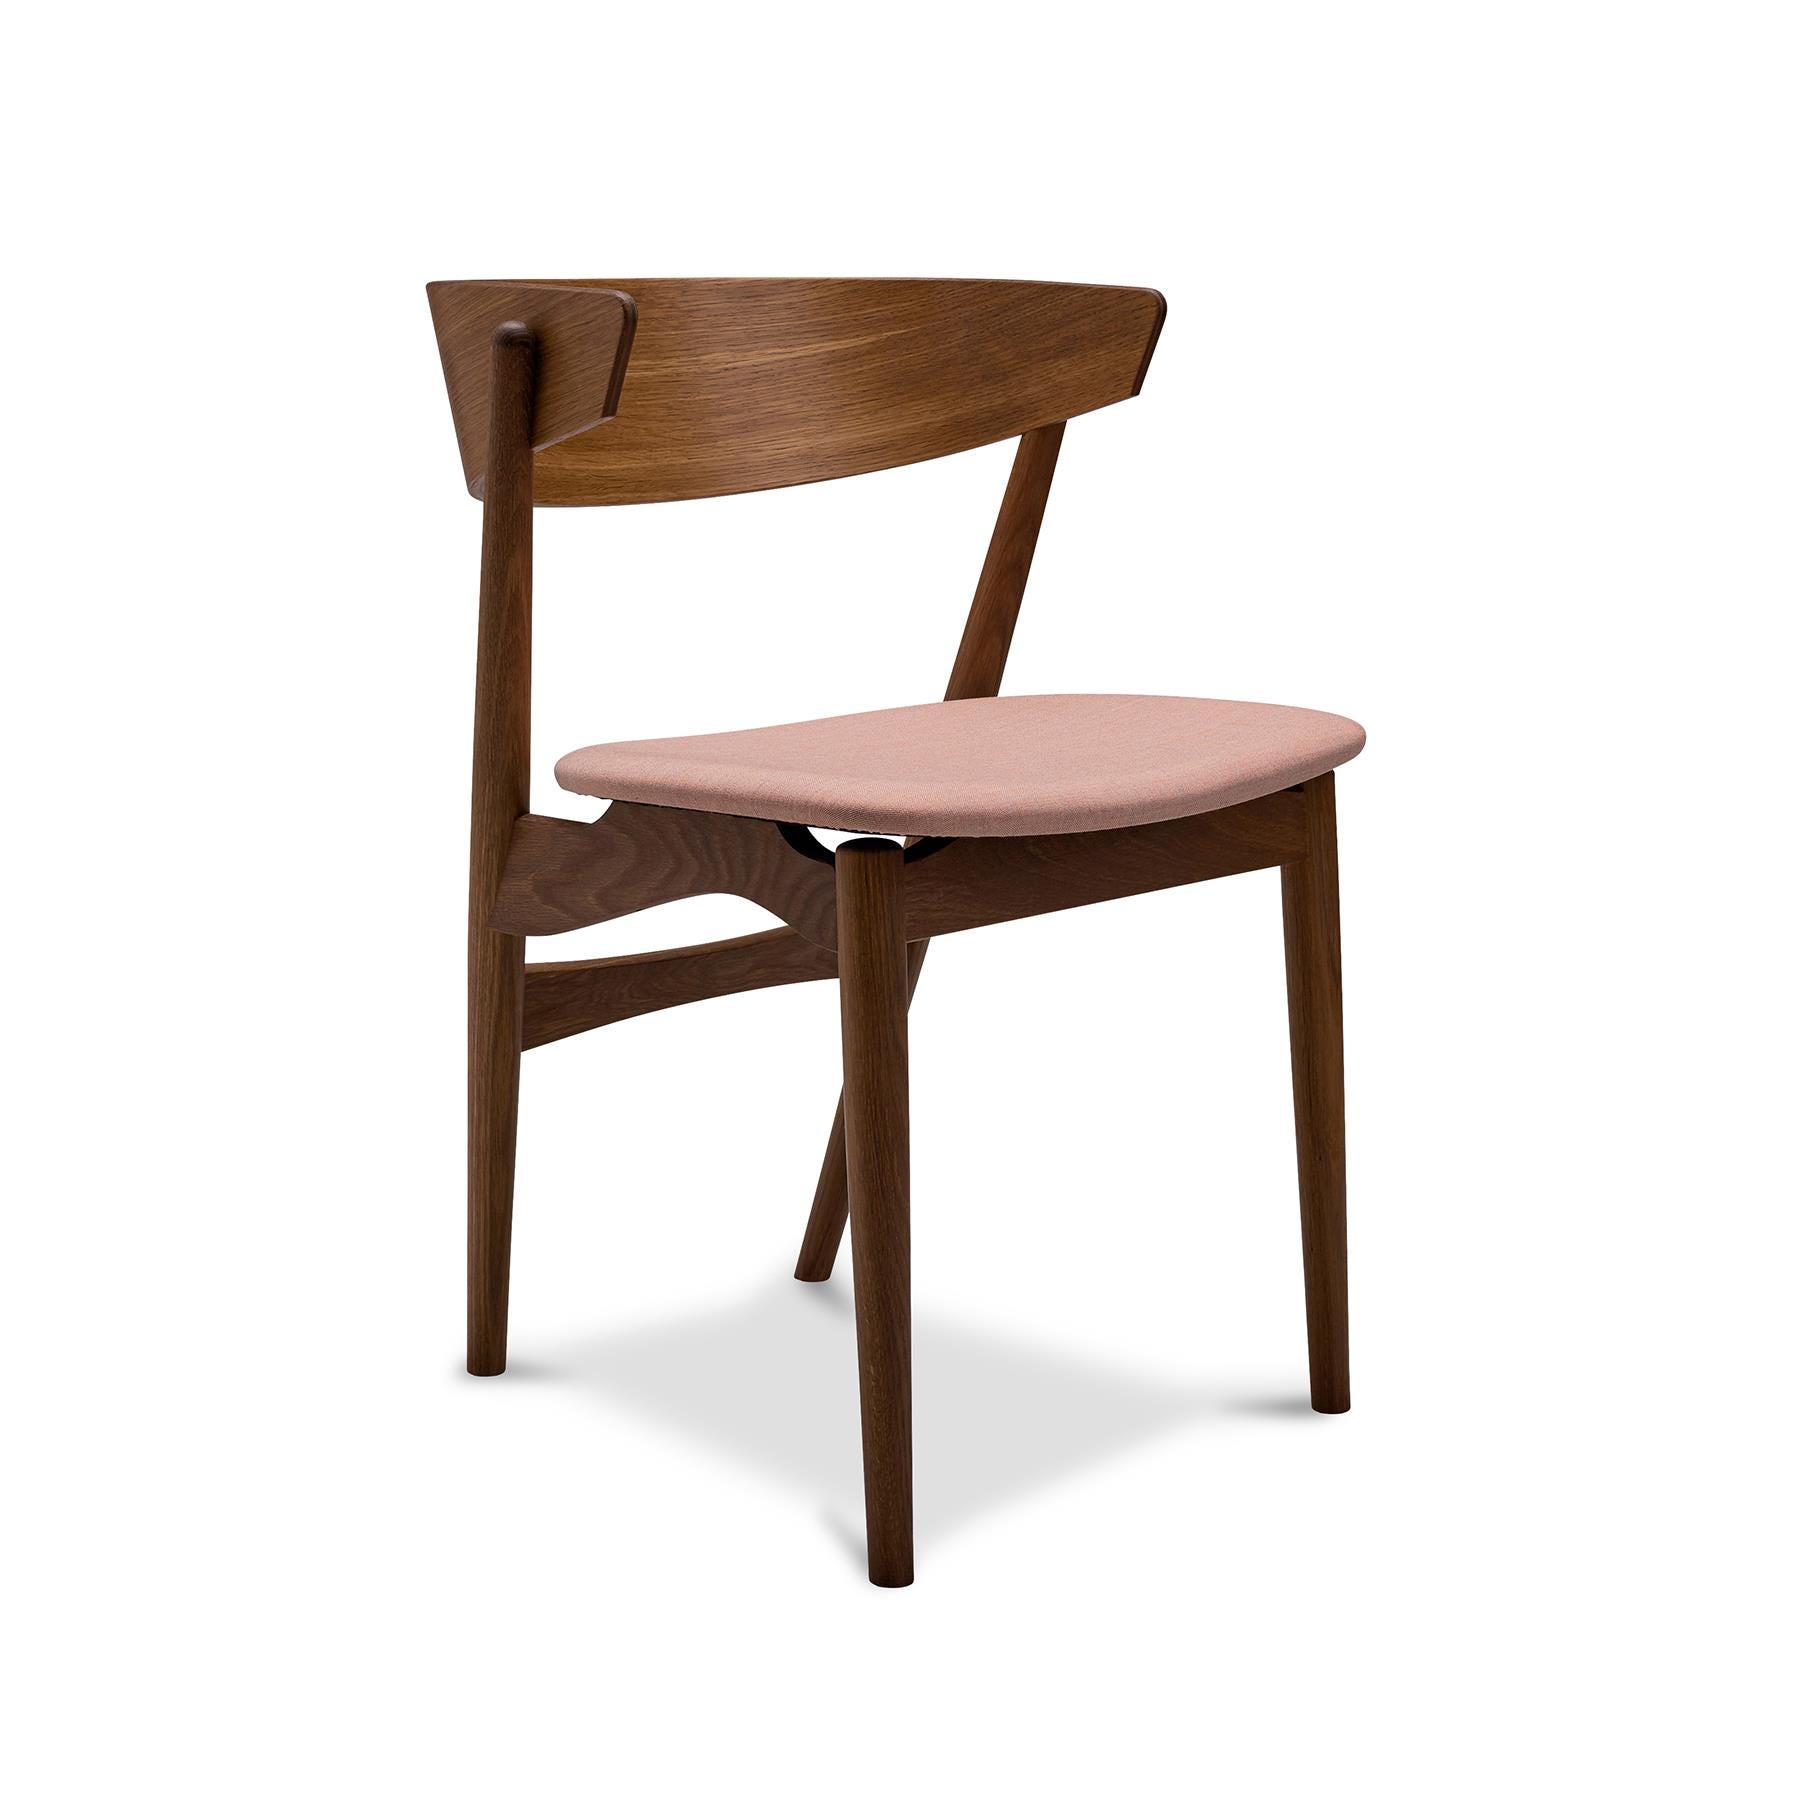 Sibast No 7 Dining Chair Upholstered Seat Smoked Oak Remix 612 Dak Wood Designer Furniture From Holloways Of Ludlow